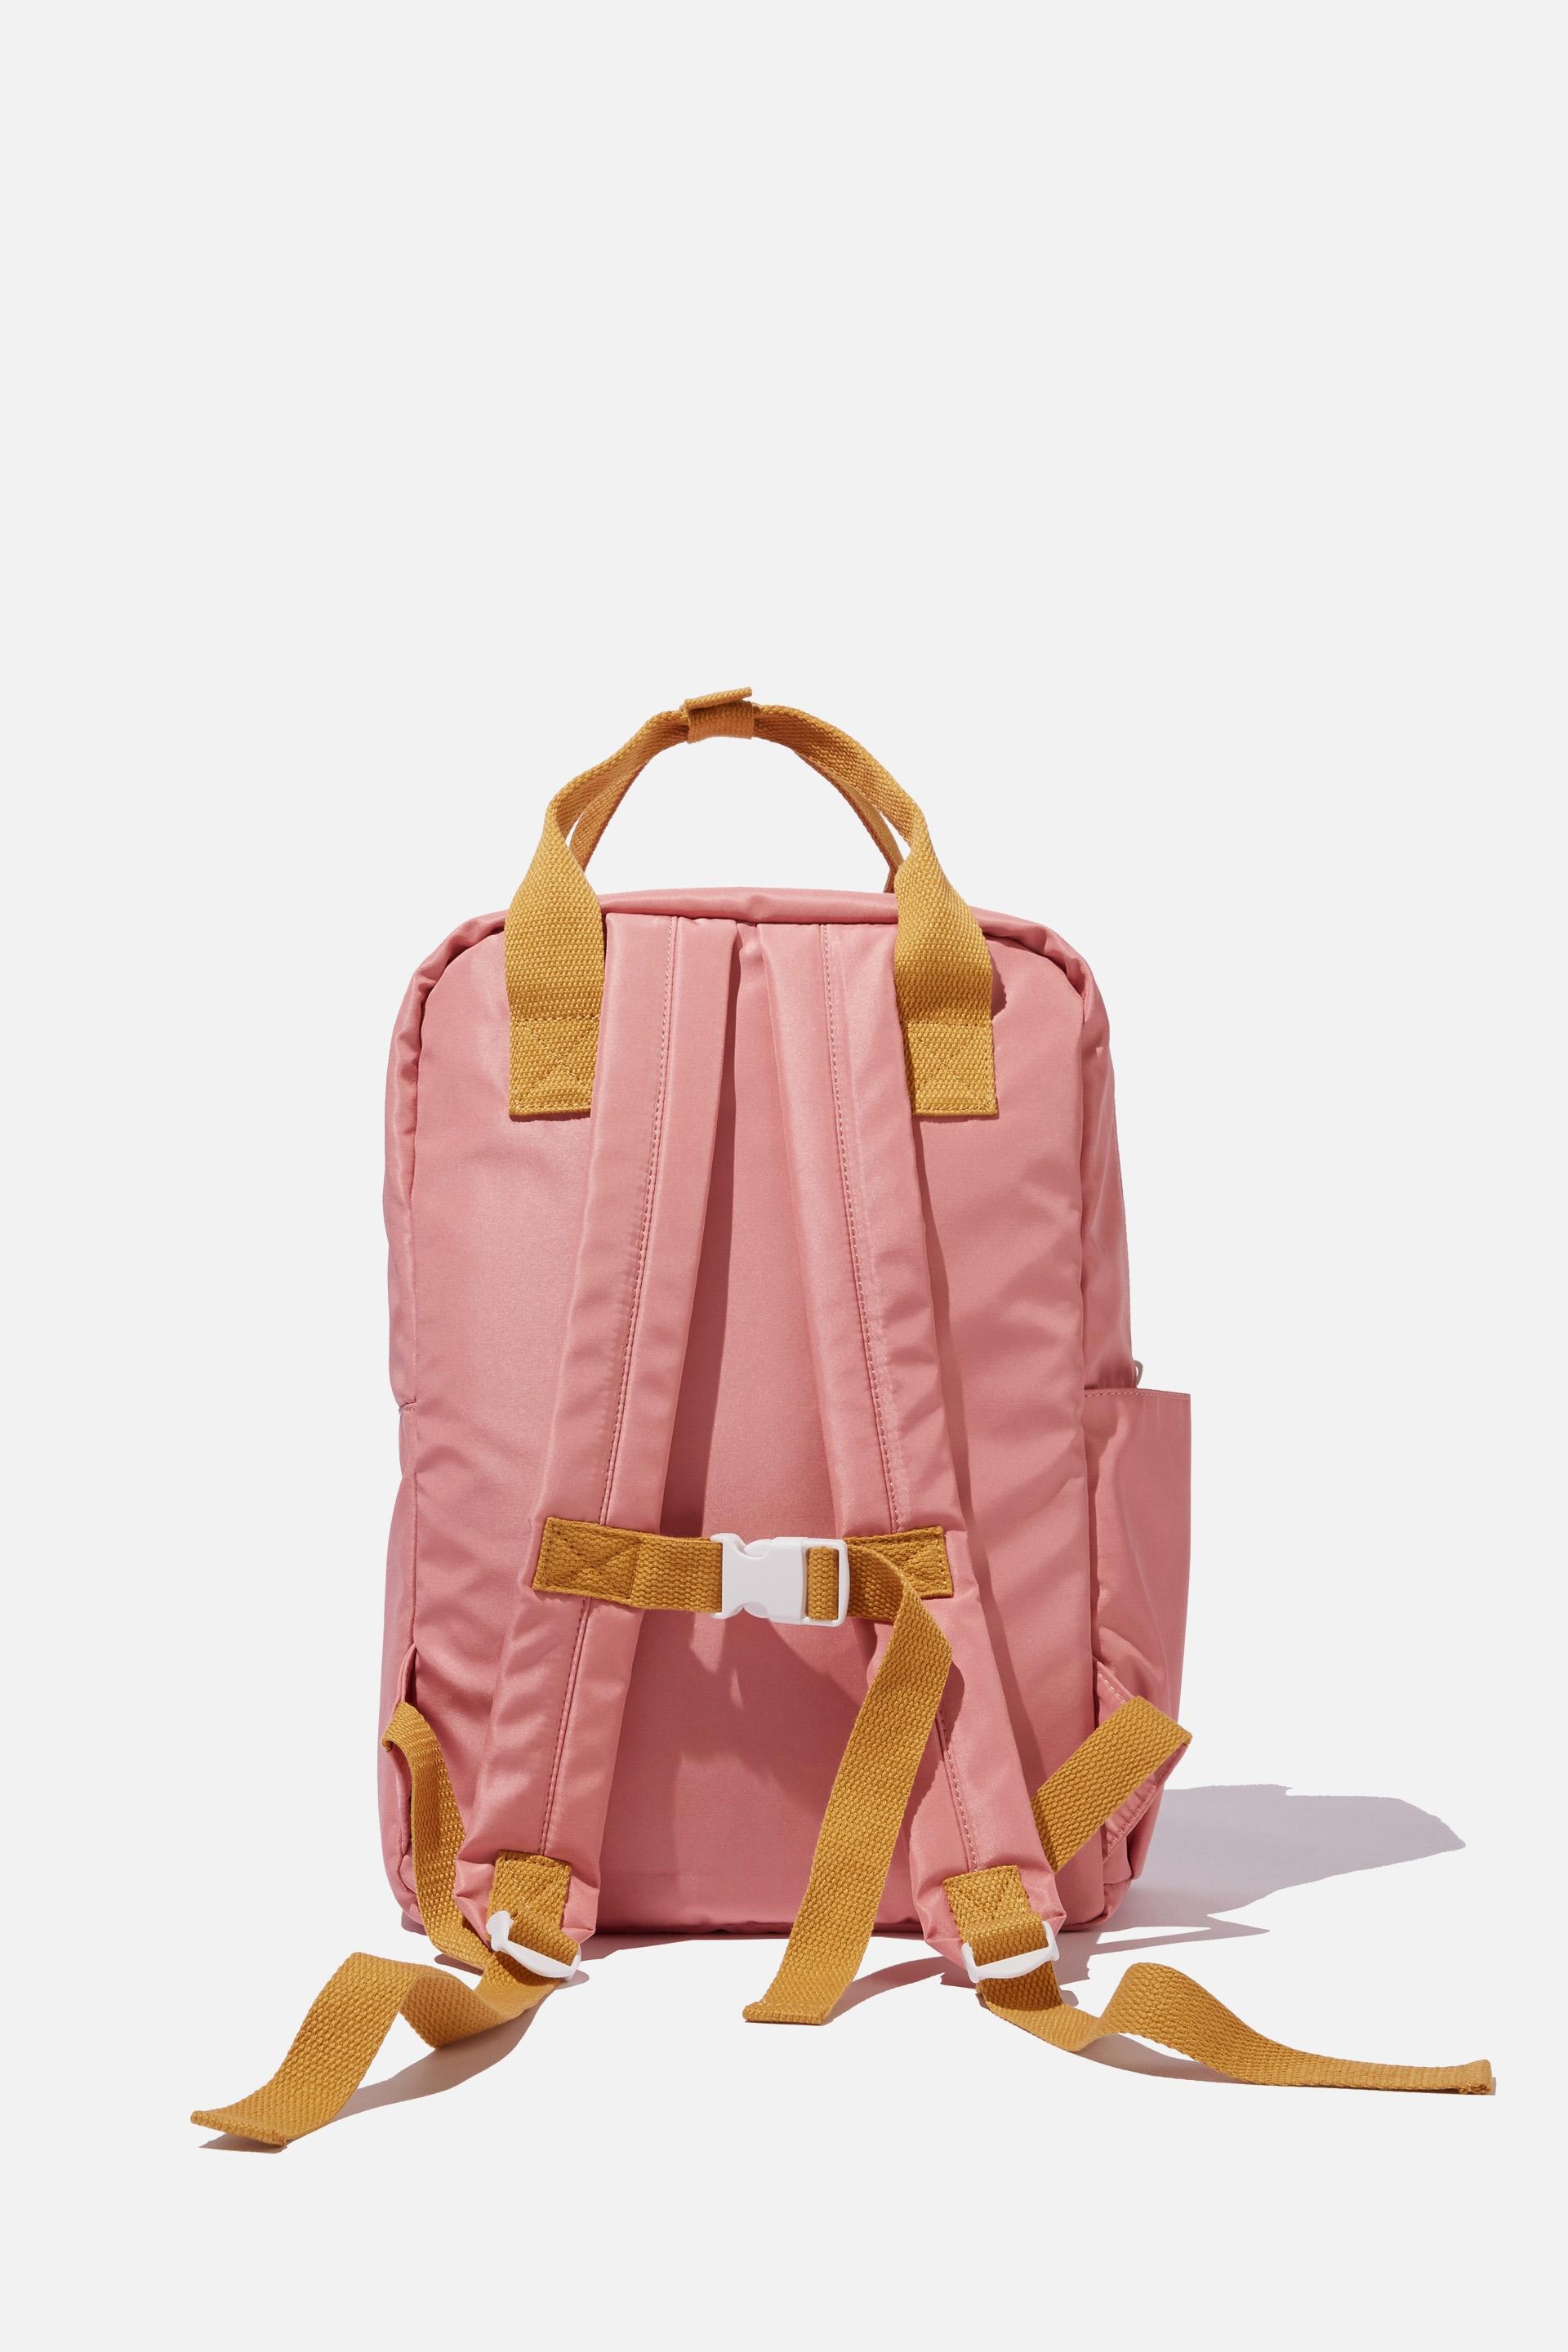 Back to school backpack - pink1 Cotton On Accessories | Superbalist.com